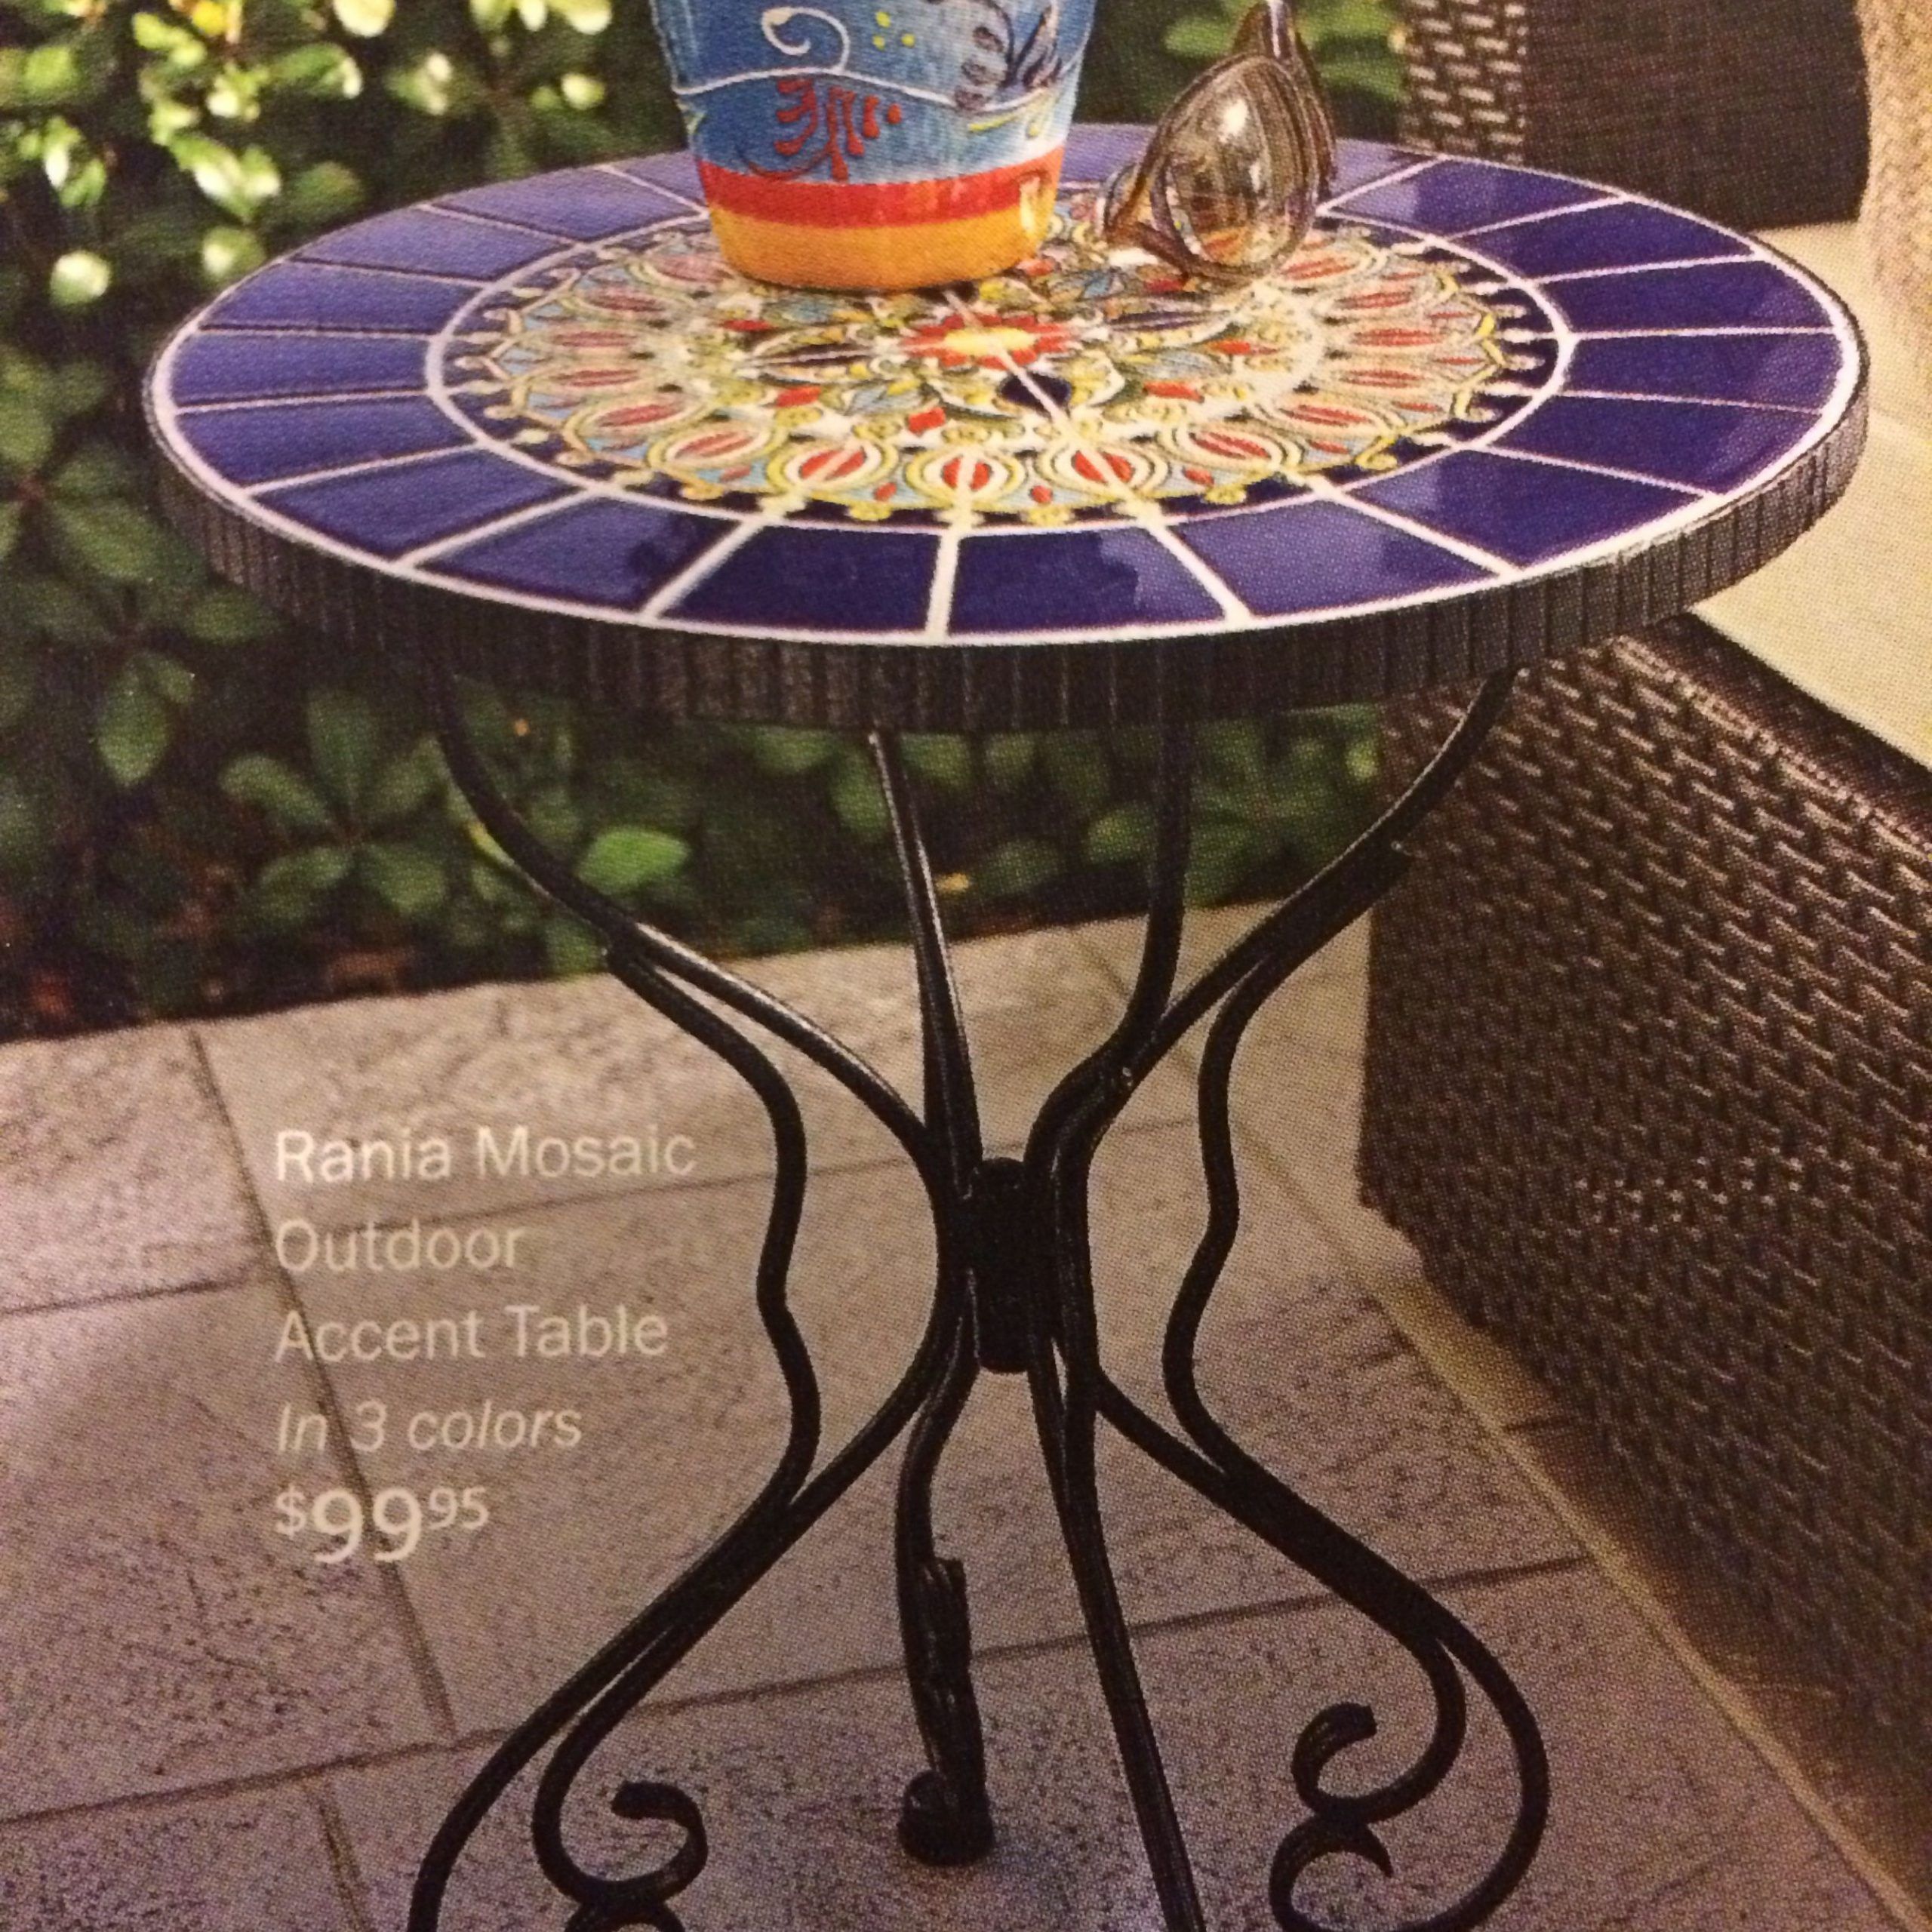 Pinlinda Kerley On Garden | Outdoor Accent Table, Mosaic Table, Table In Green Mosaic Outdoor Accent Tables (View 4 of 15)